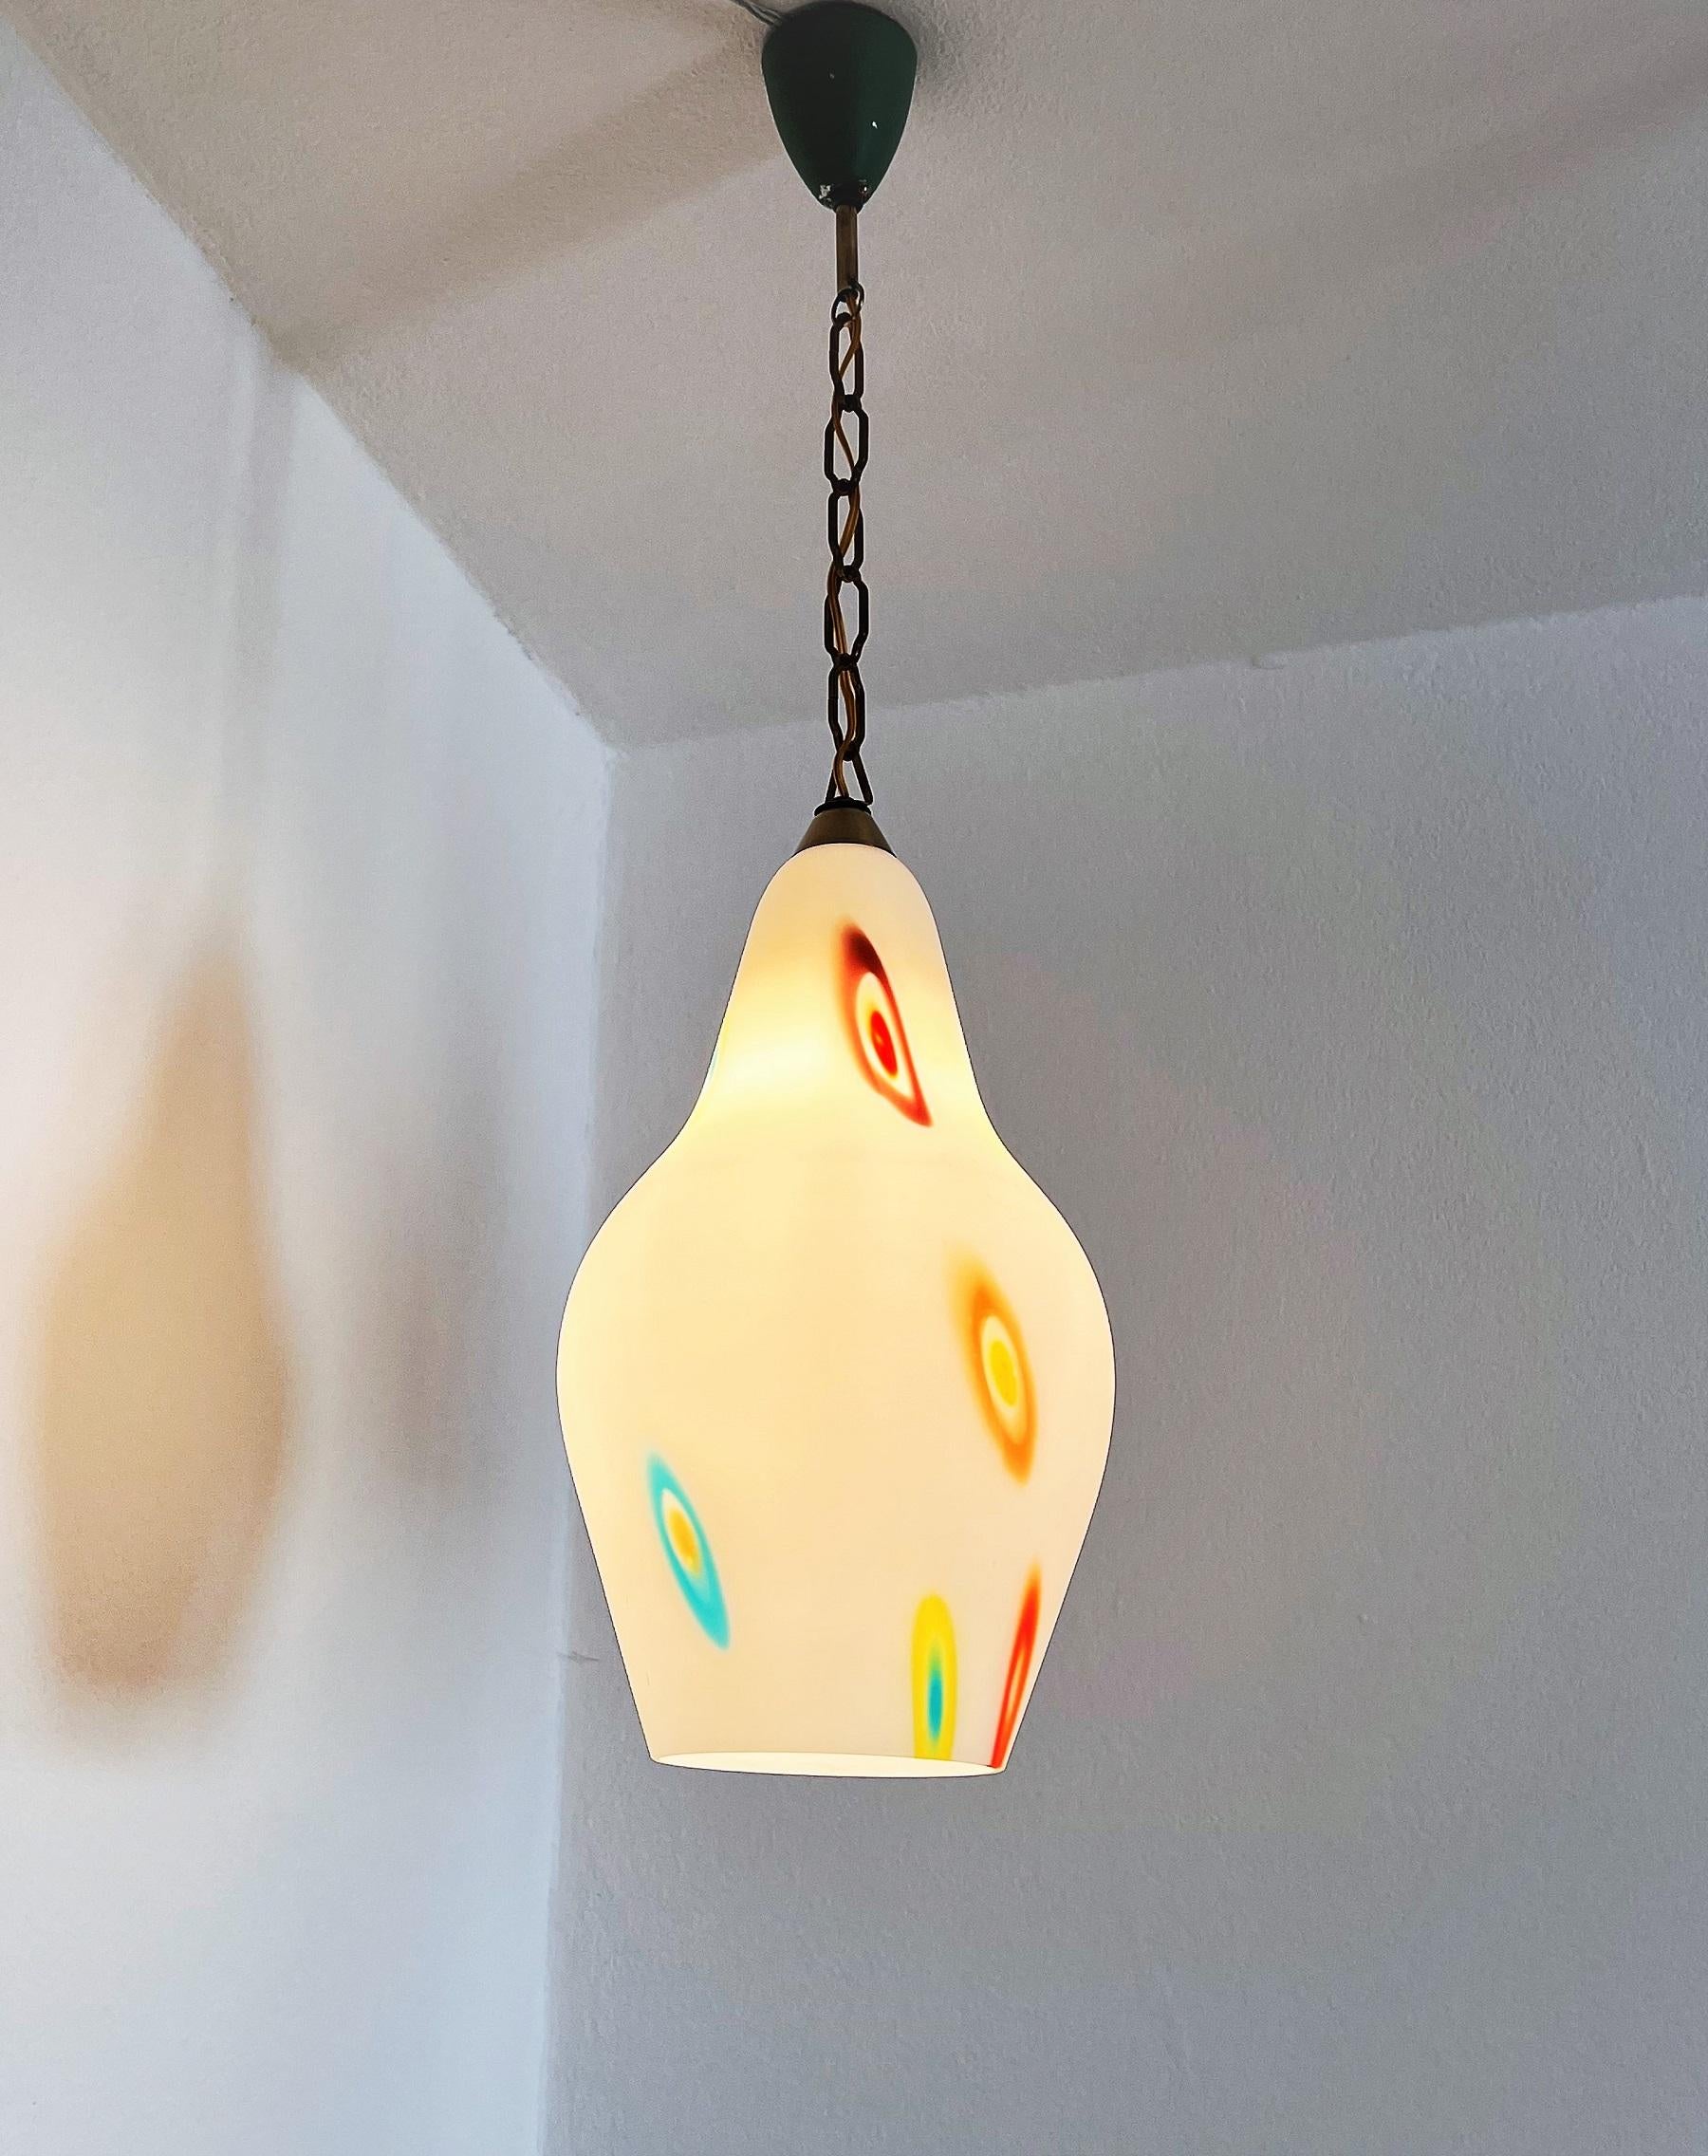 Late 20th Century Italian Midcentury Murano Glass Pendant Lights with Colorful Murrine, 1970s For Sale